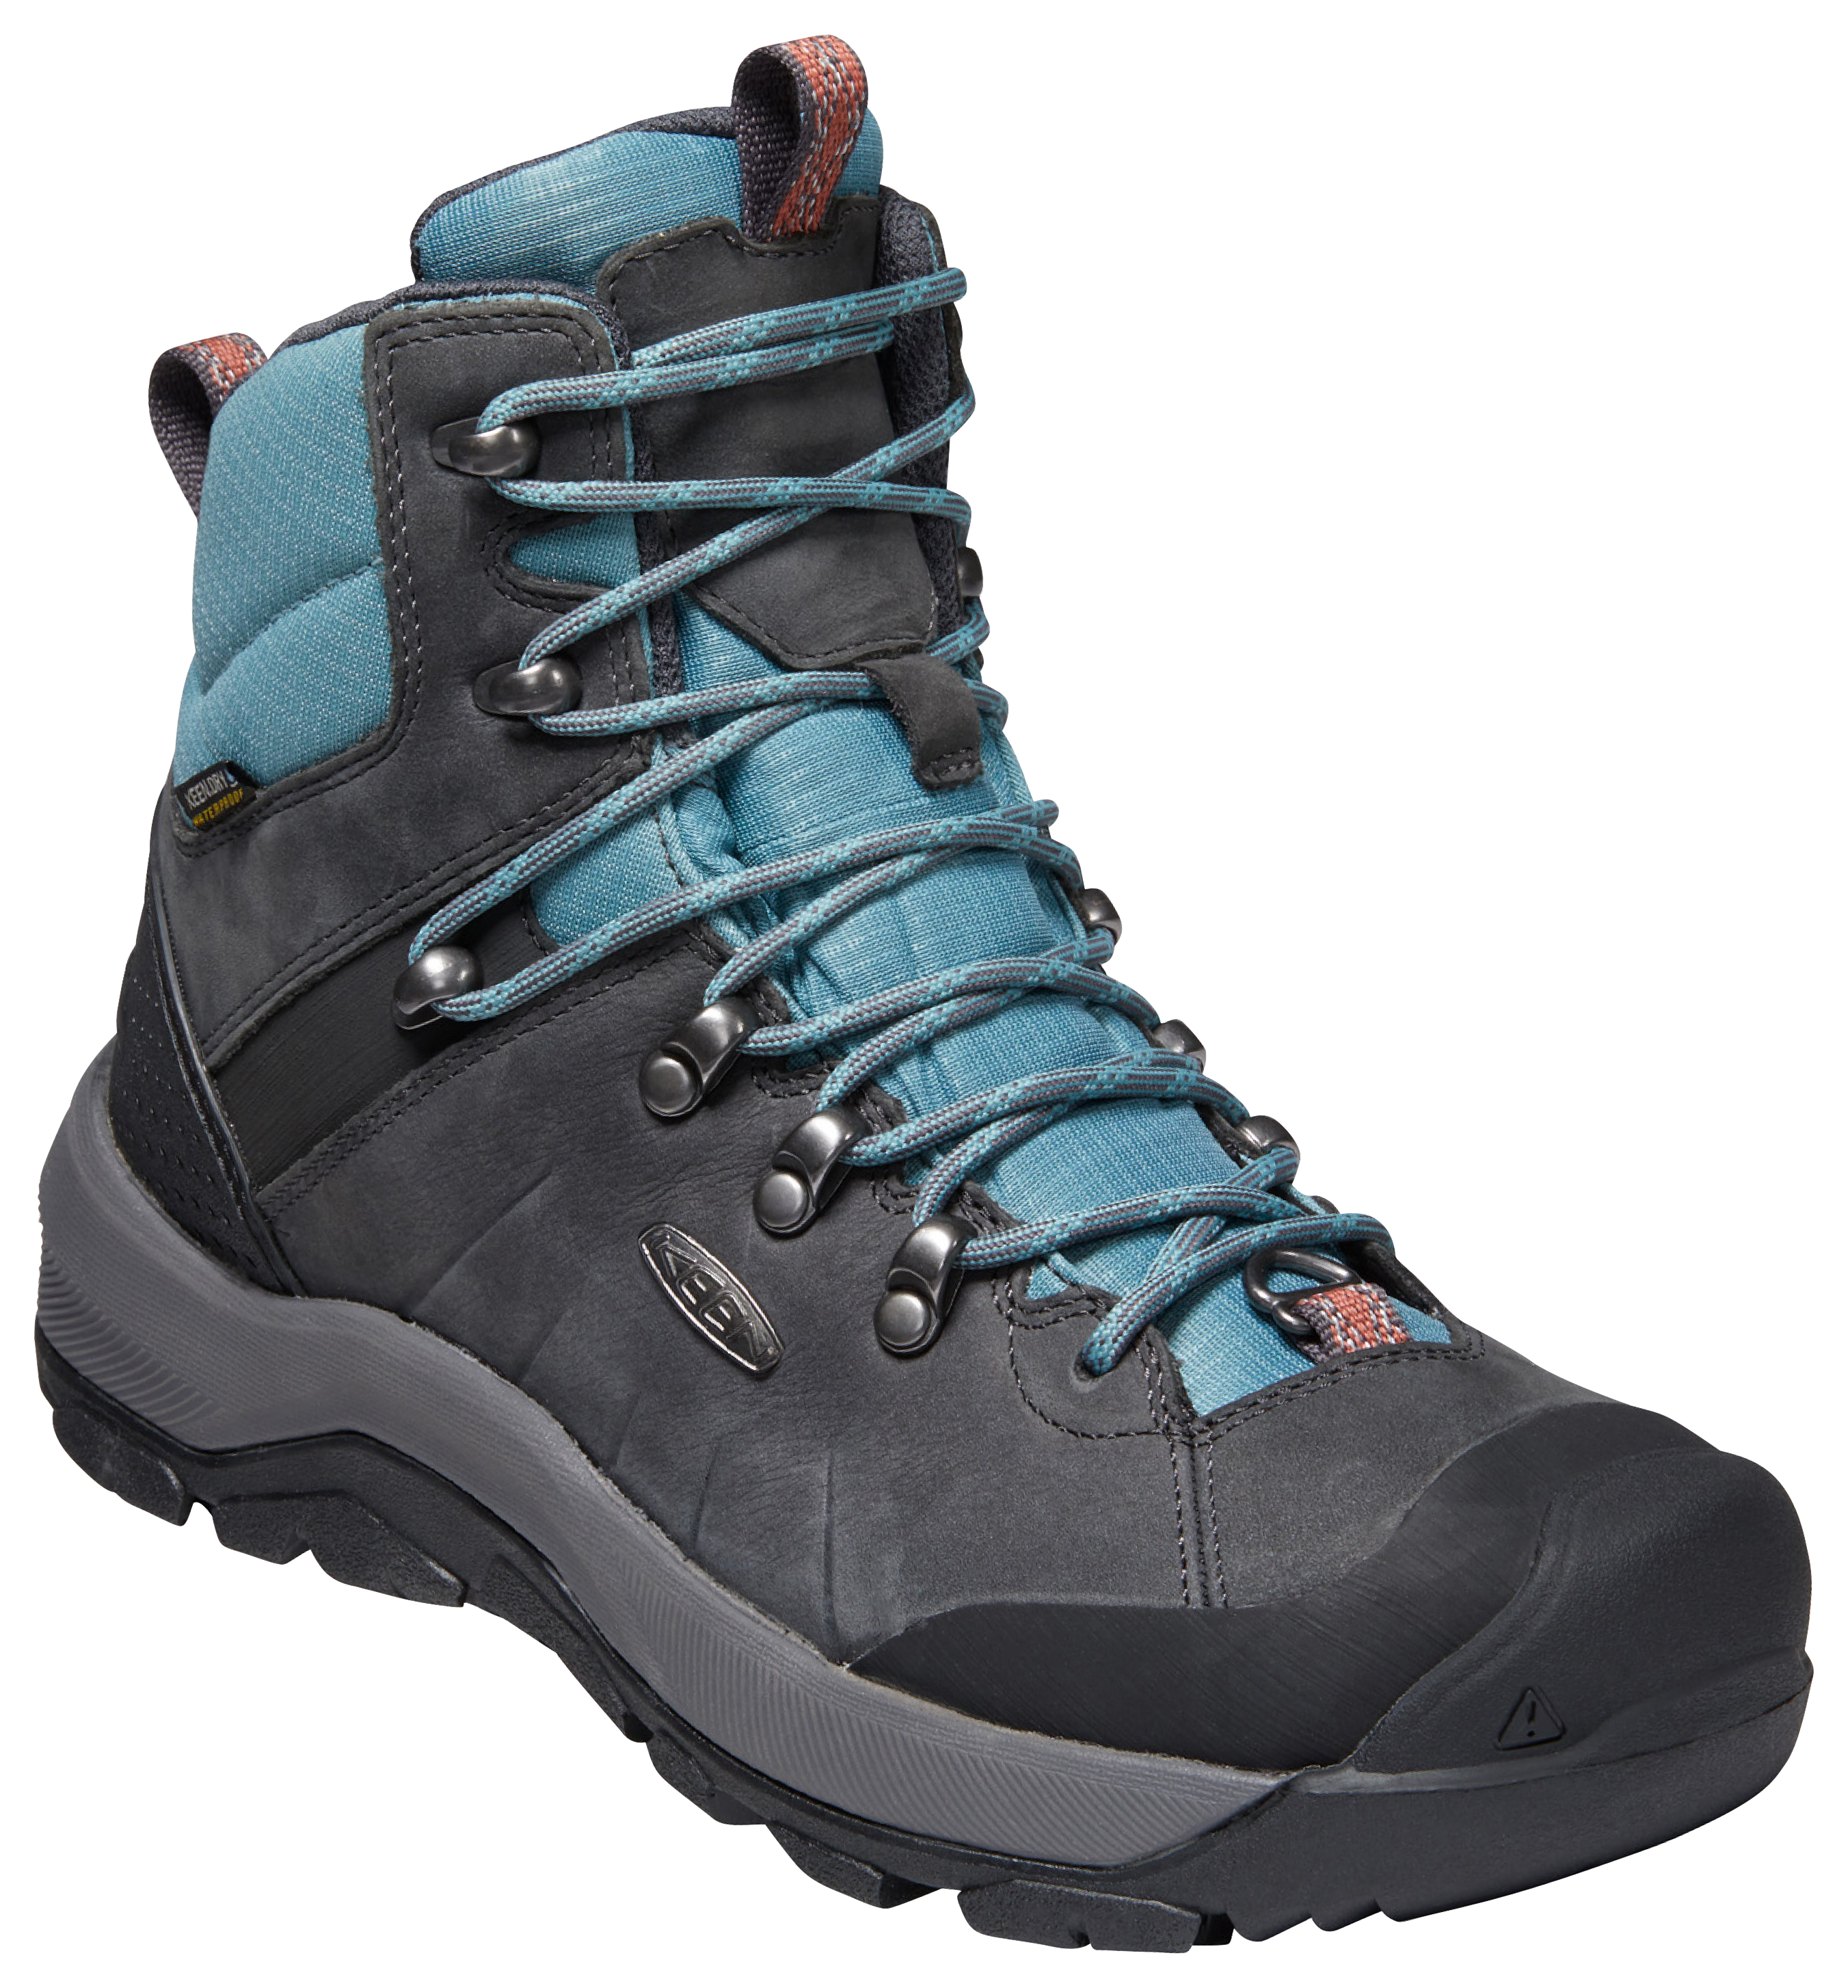 KEEN Revel IV Polar Insulated Waterproof Hiking Boots for Ladies - Magnet/North Atlantic - 6.5M